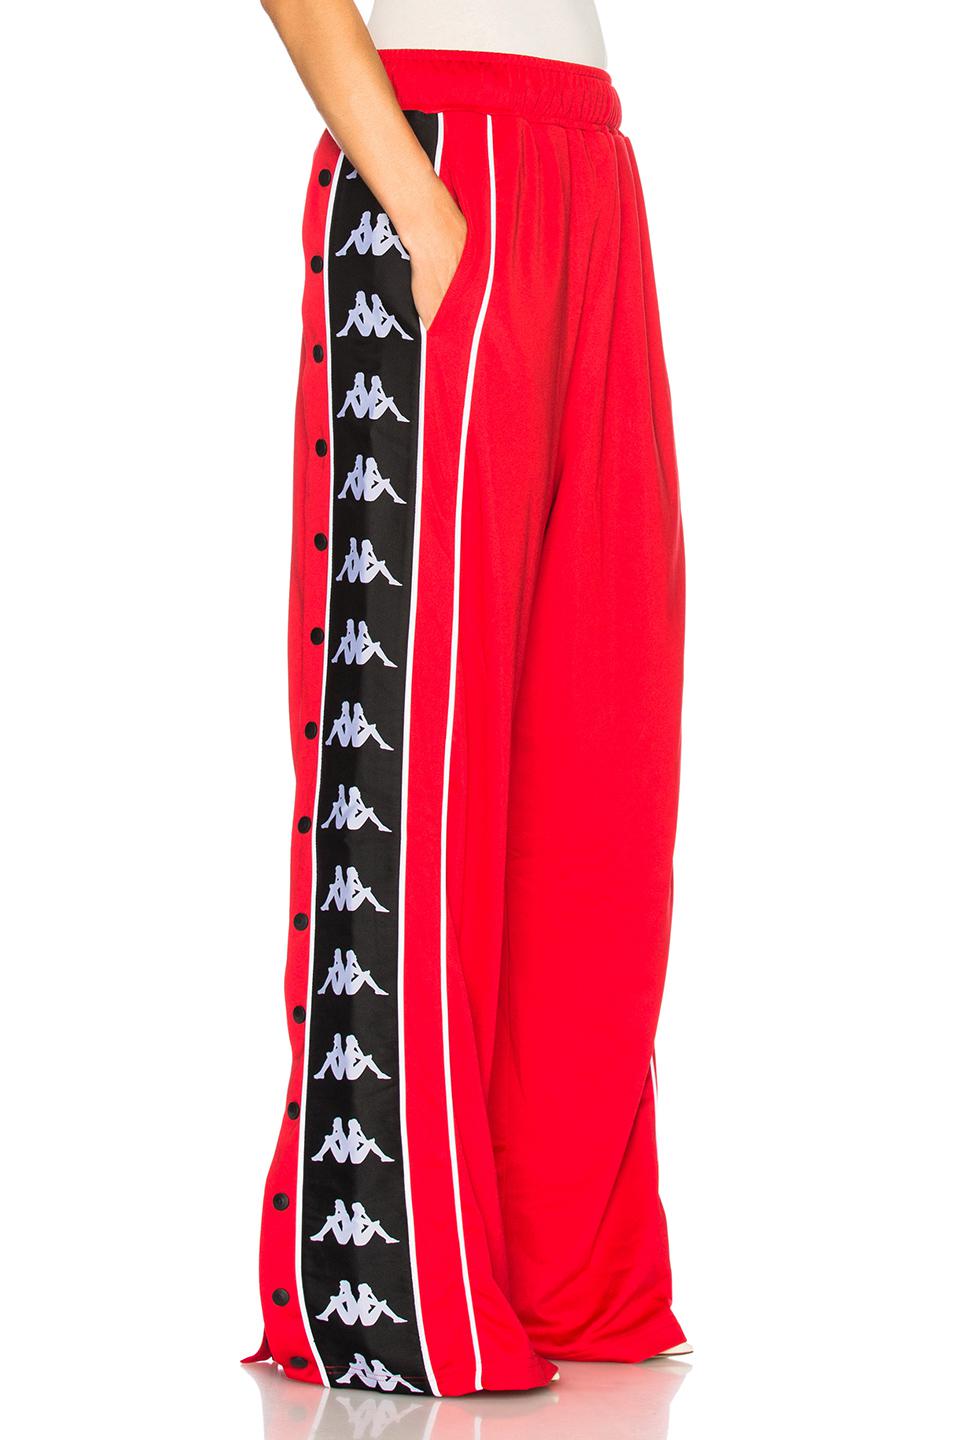 Faith Connexion X Kappa Tear Away Pant in Red - Lyst